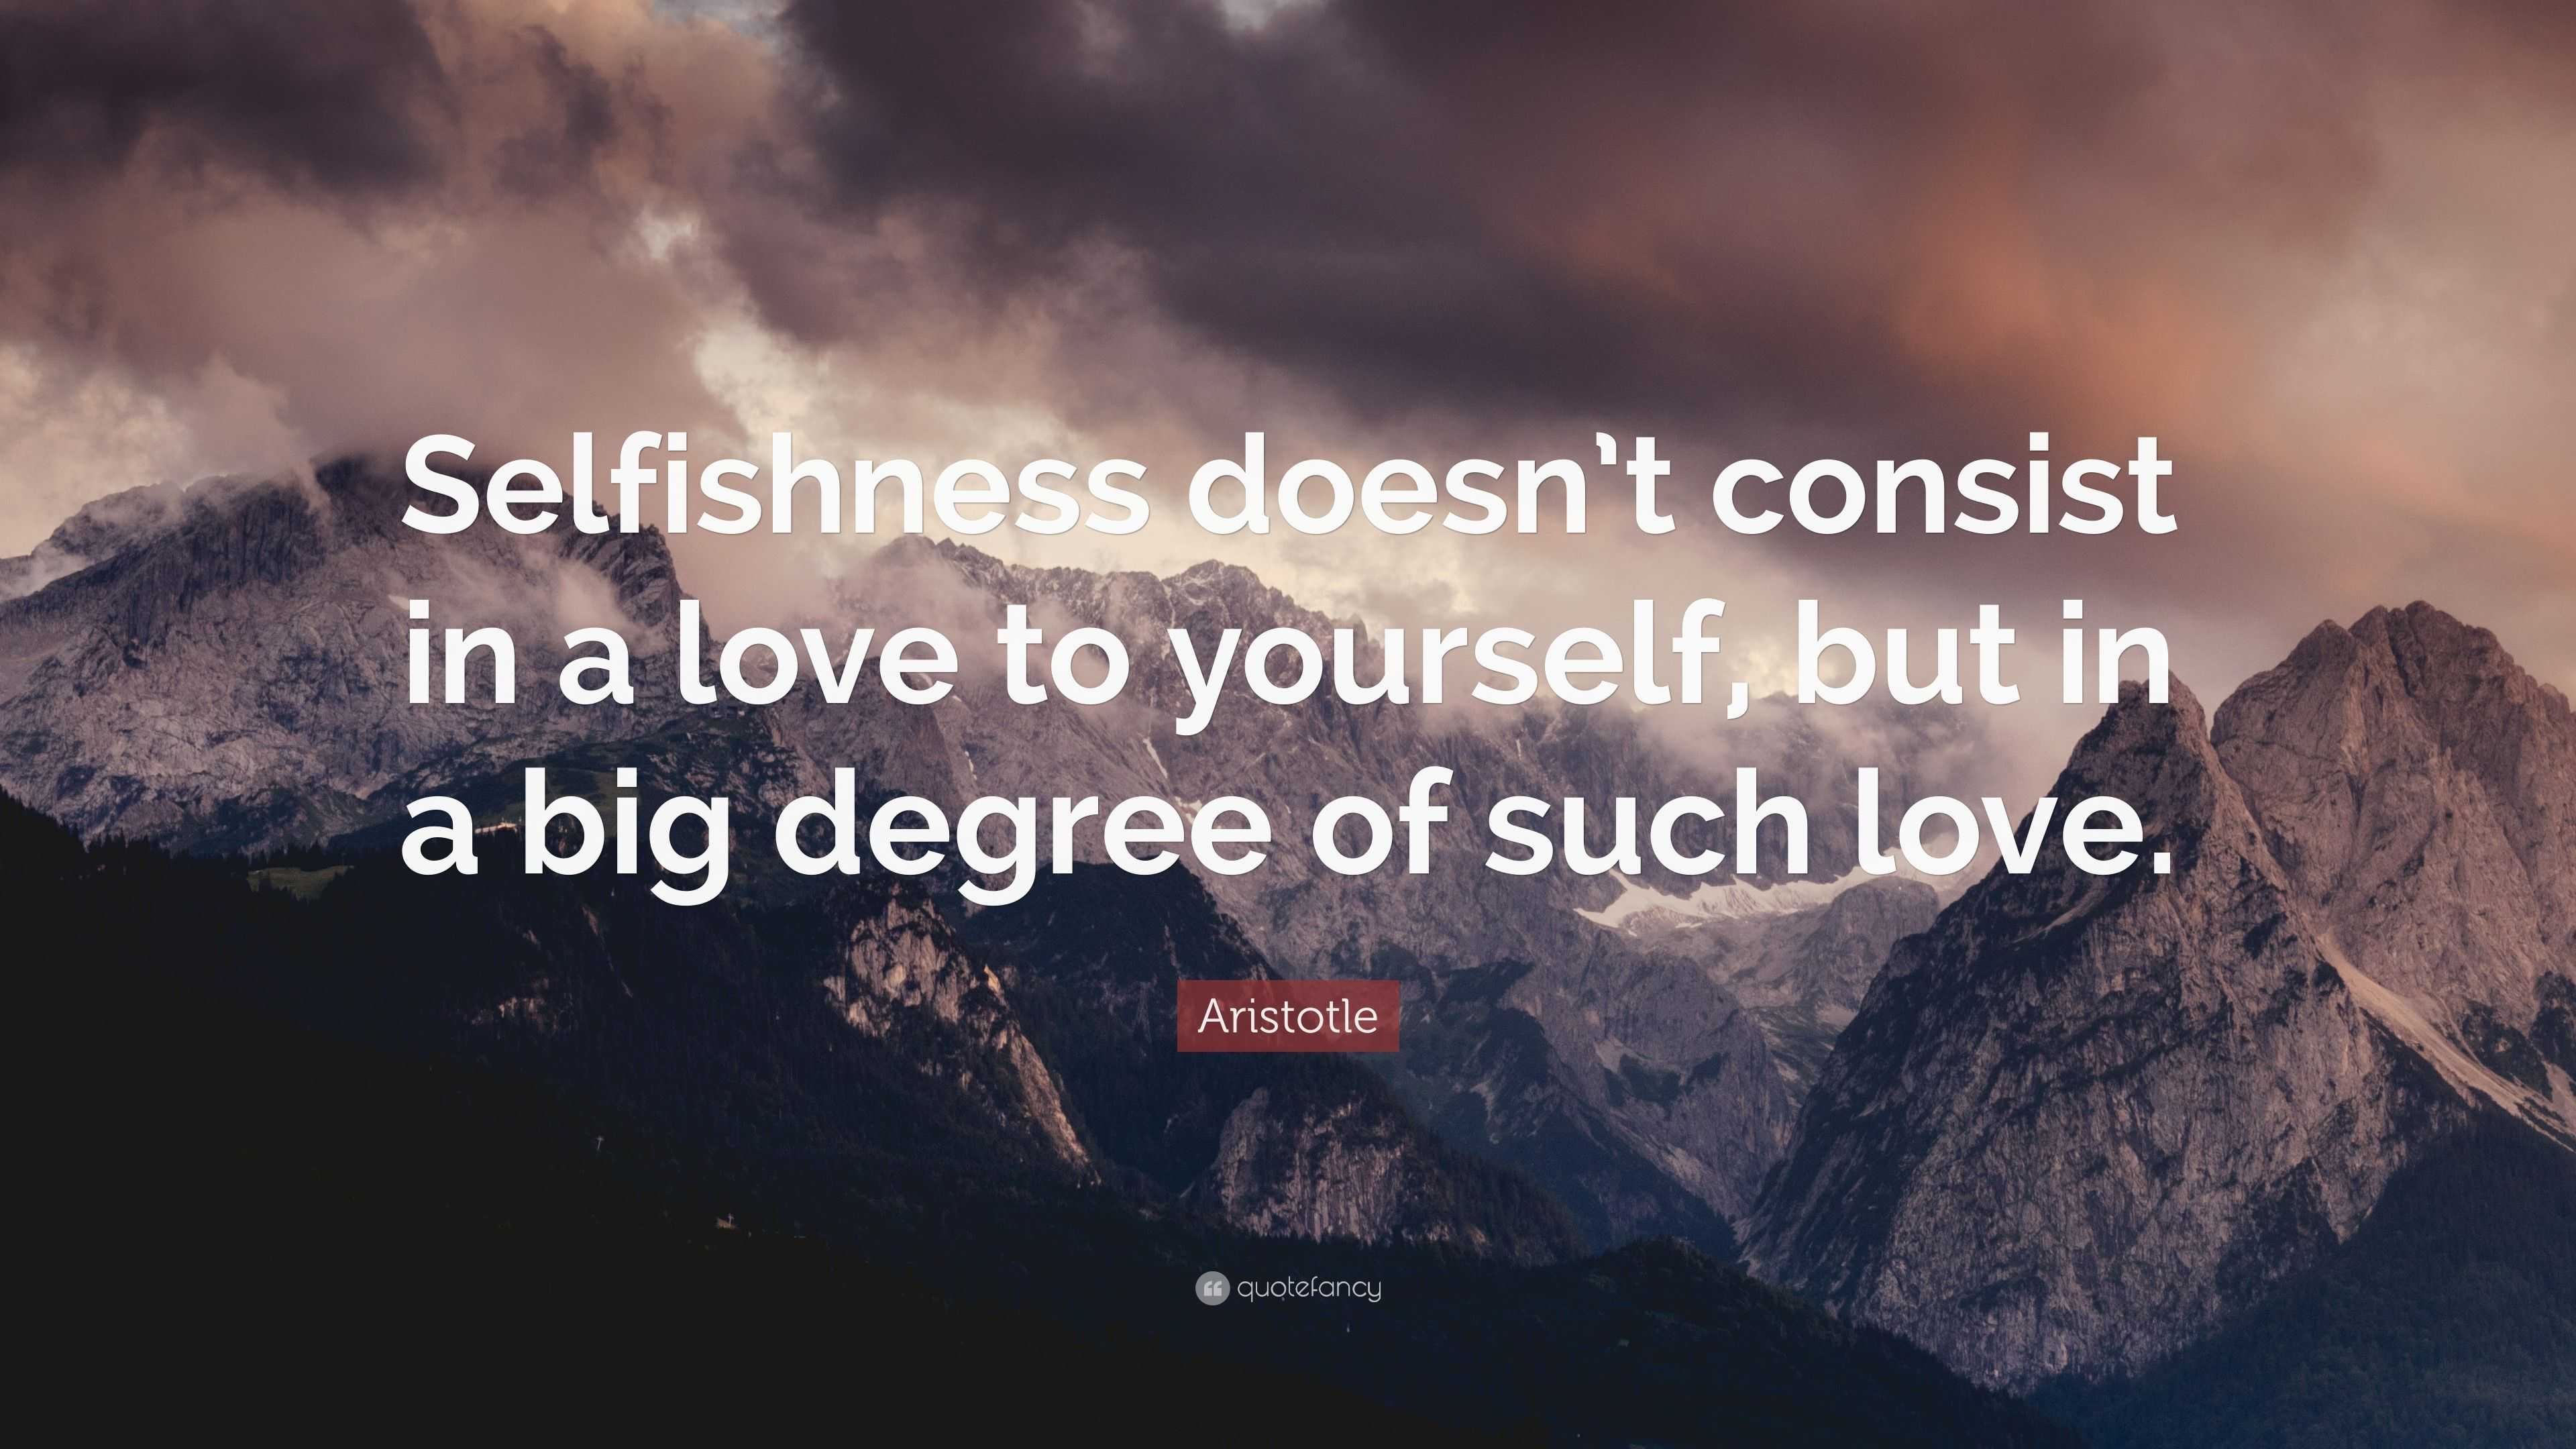 Aristotle Quote: “Selfishness doesn’t consist in a love to yourself ...